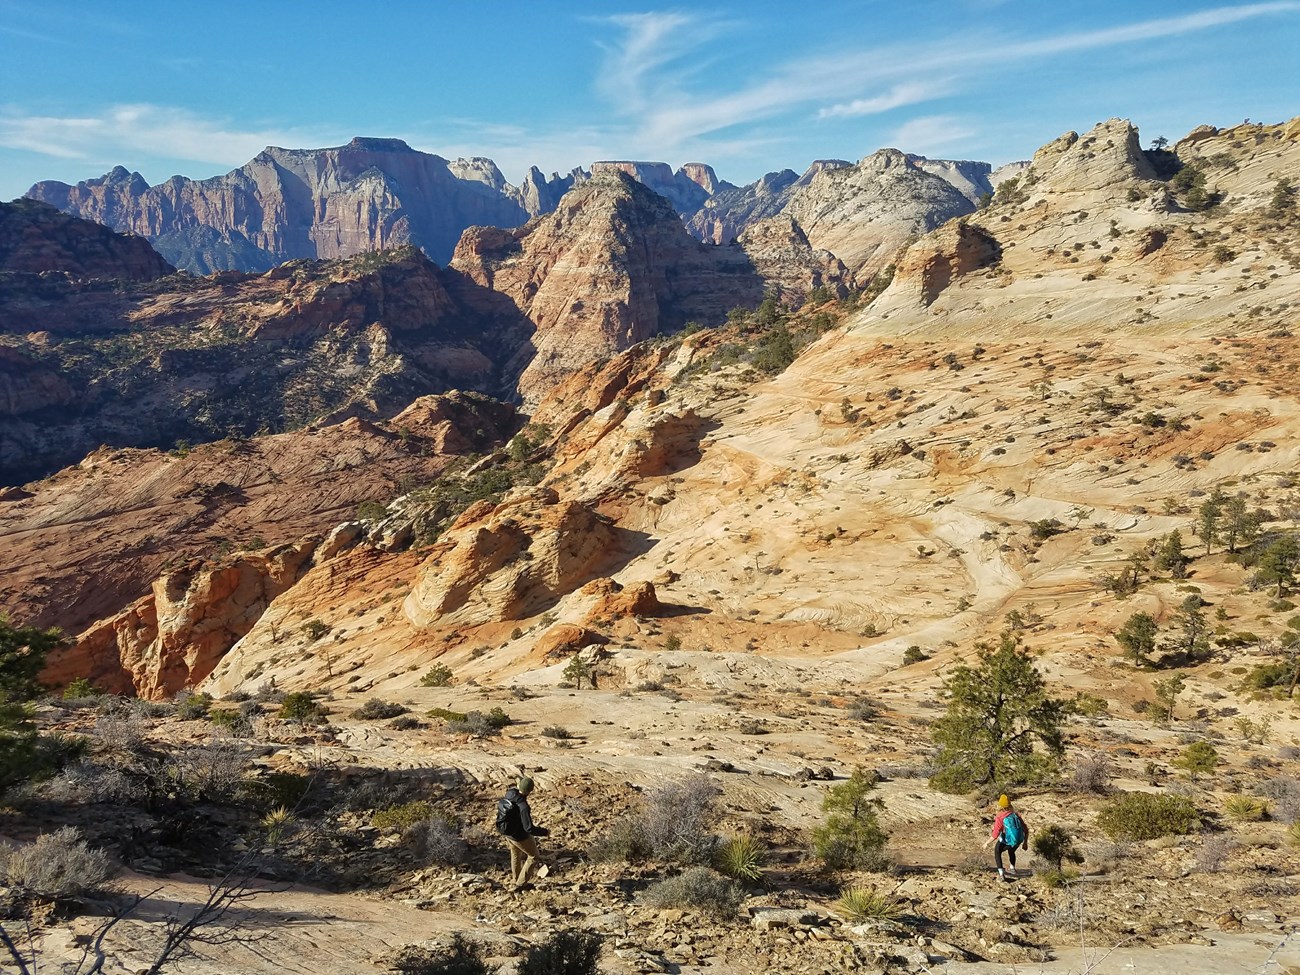 Two hikers off-trail in the Zion Wilderness